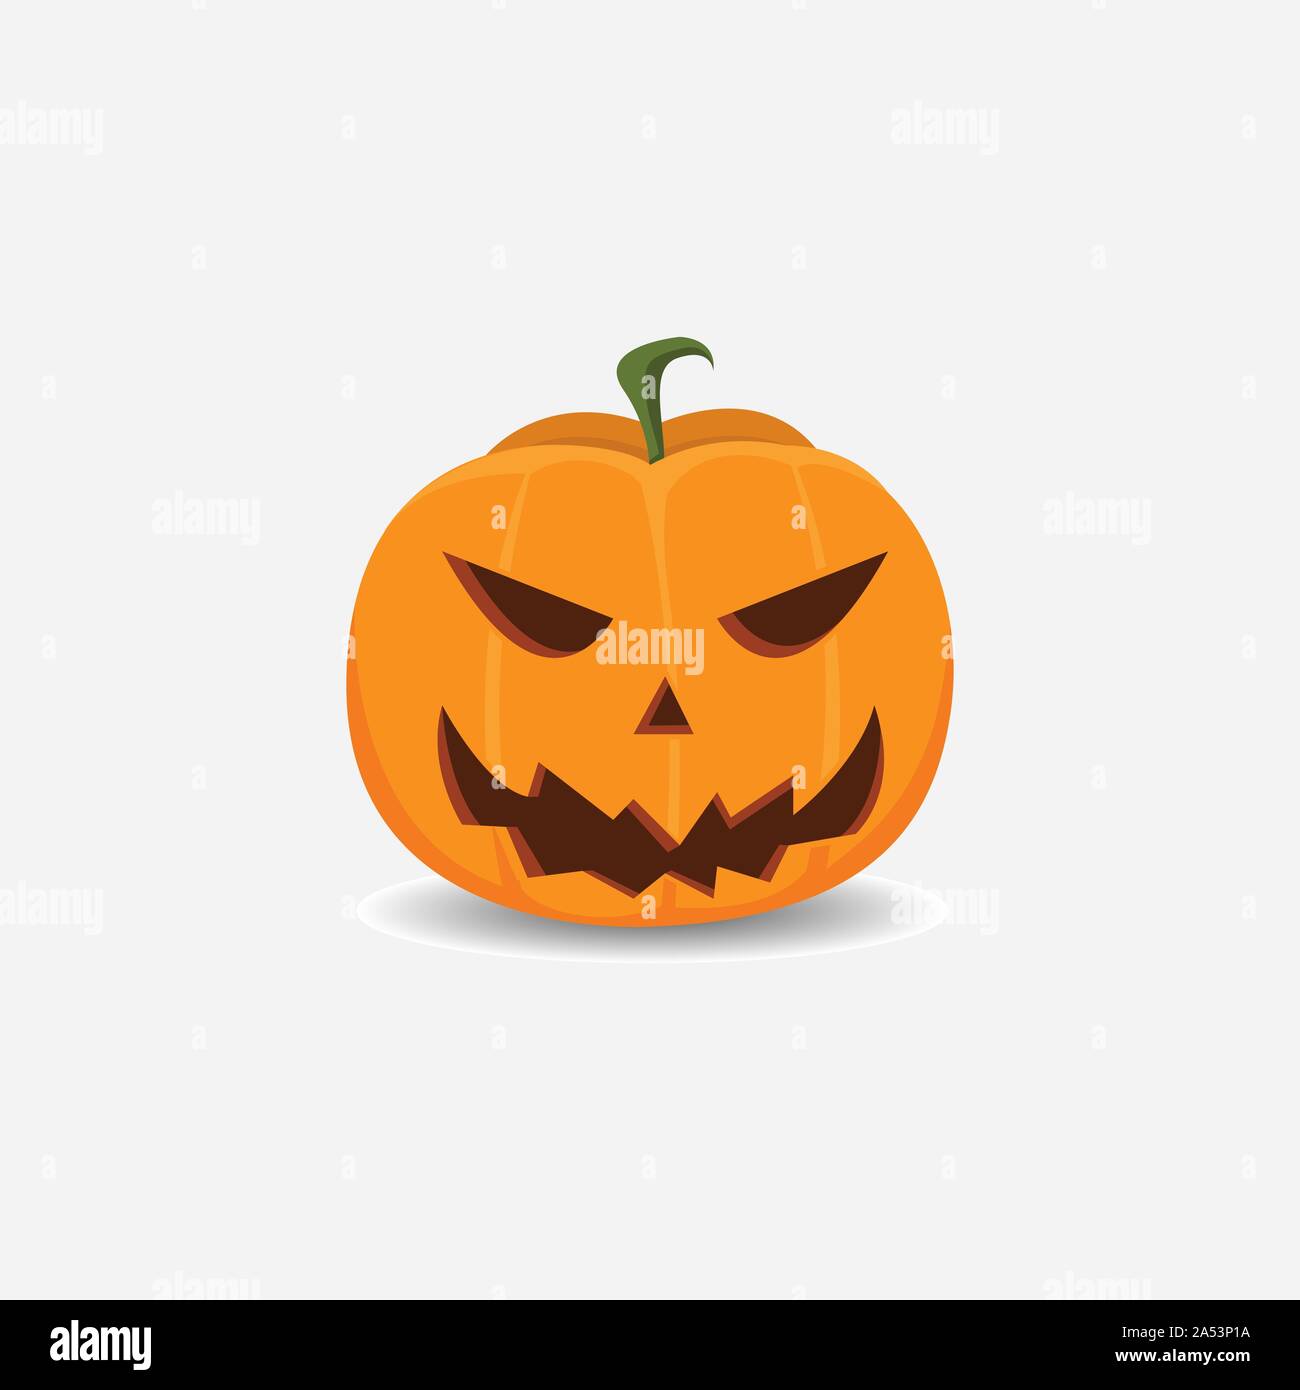 Scary pumpkins vector image. Halloween scary pumpkins isolated on white vector image. Stock Vector